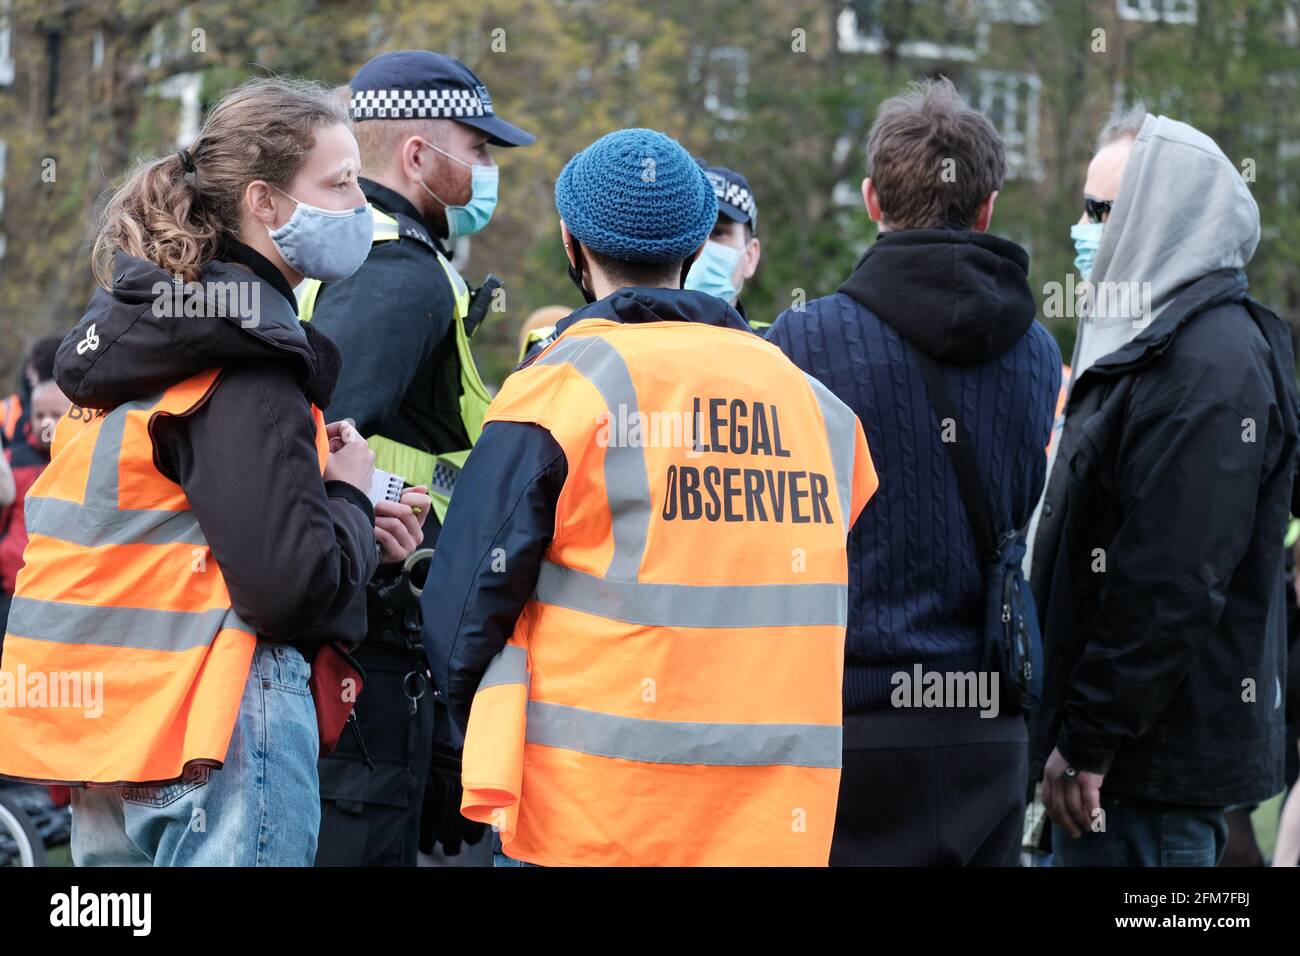 Legal observers, trained volunteers and identified by their hi-viz vests monitor police interactions at a Kill the Bill protest in Vauxhall, London Stock Photo